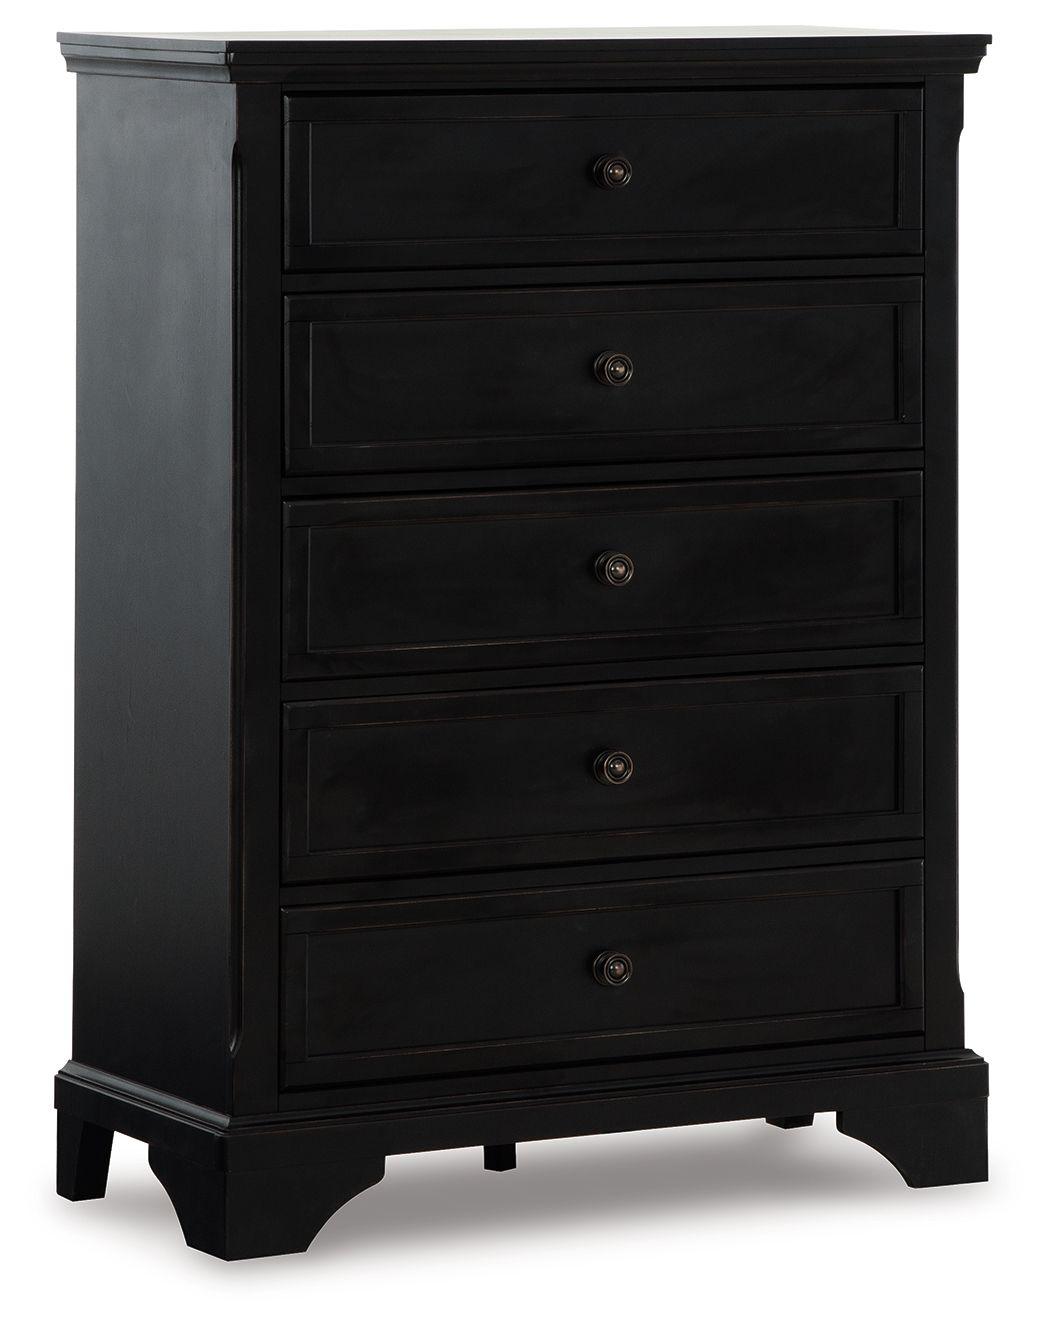 Chylanta - Black - Five Drawer Chest Tony's Home Furnishings Furniture. Beds. Dressers. Sofas.